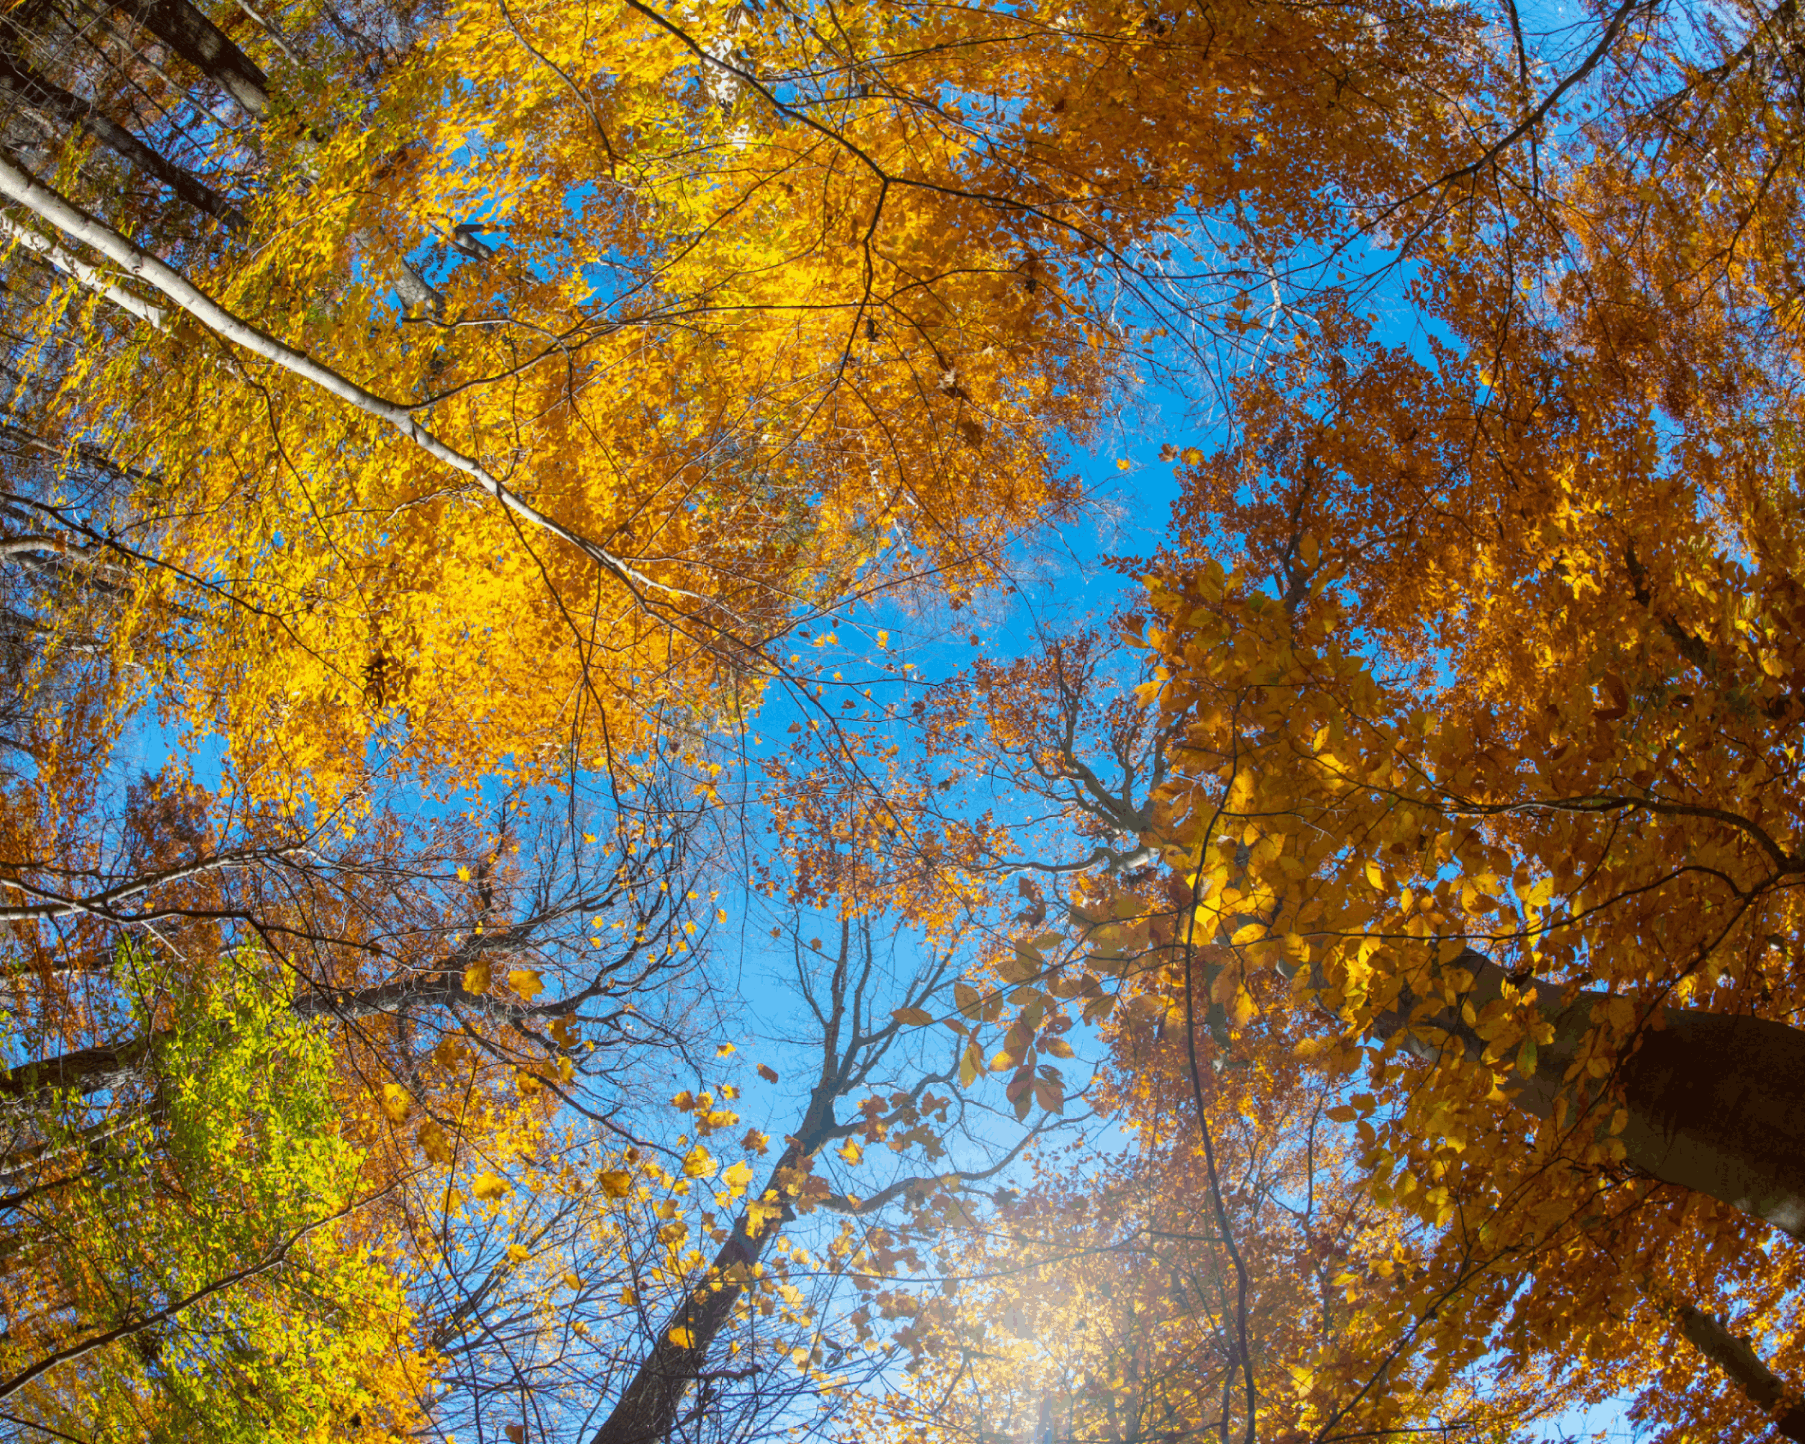 Fall colors at Dysart Woods in Belmont County, near Ohio University’s Eastern Campus.